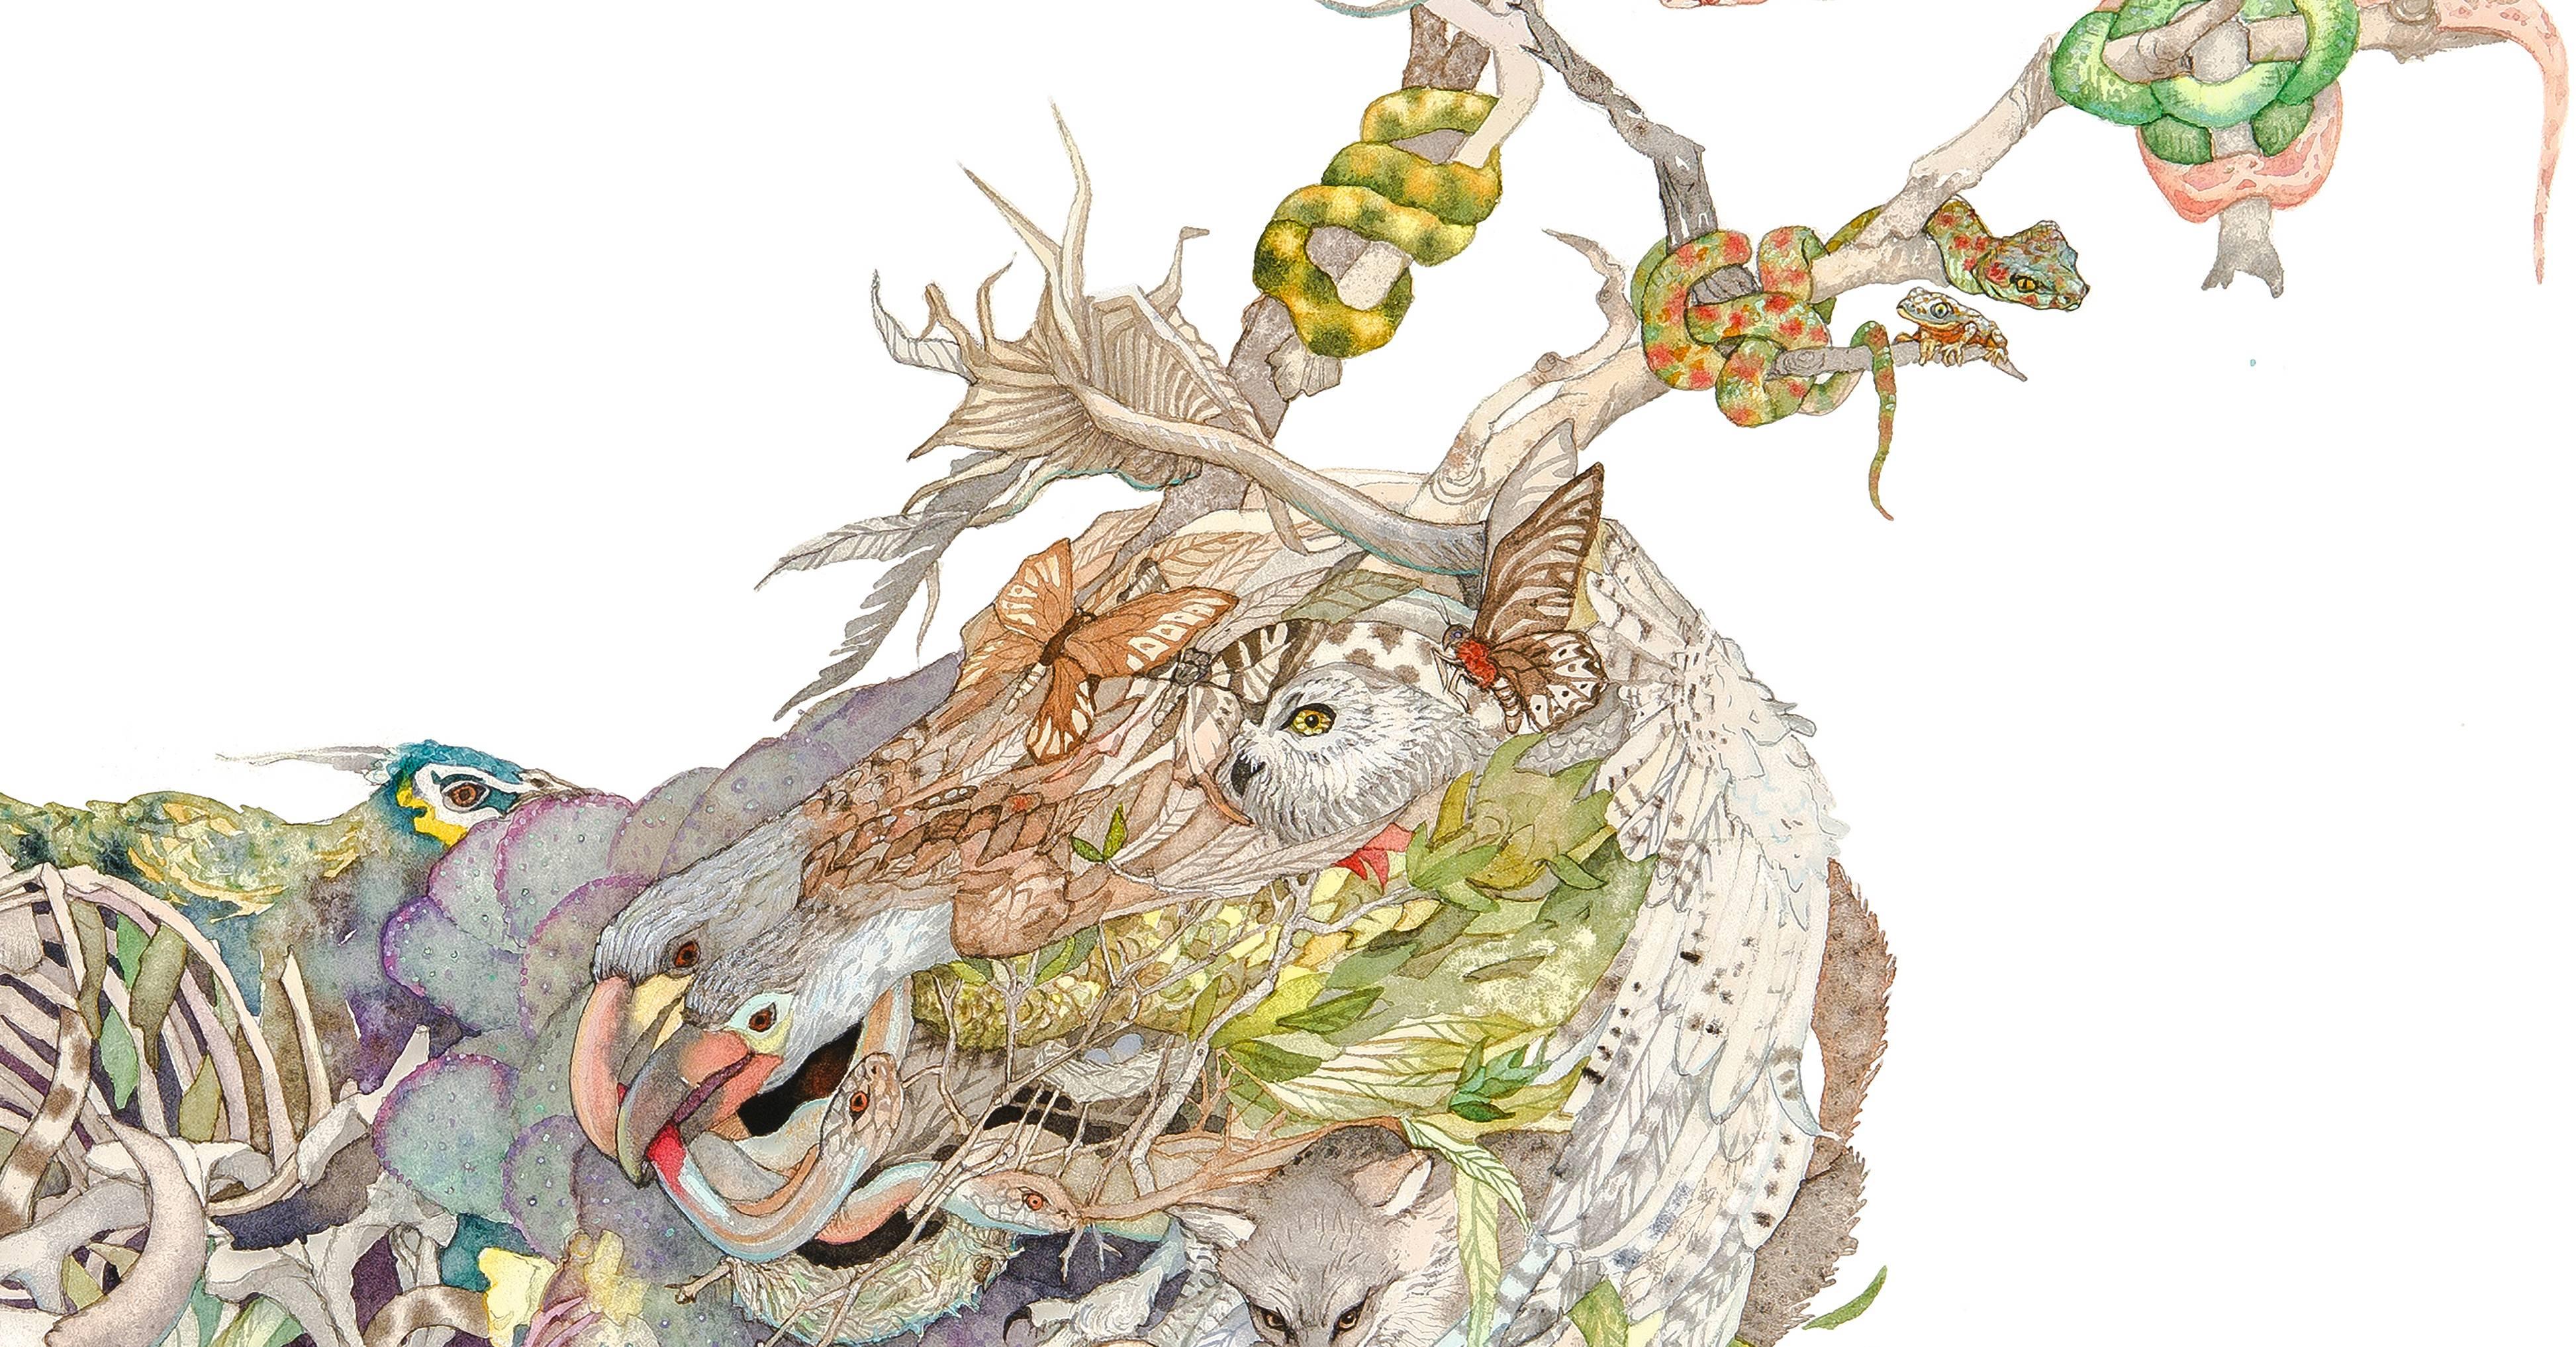 The creatures populating Ball’s watercolors emerge from the psyche as surging masses of life, death, and subconscious urges. Composed of plant and animal parts that seem held together magnetically or through a magical willpower, the animals function